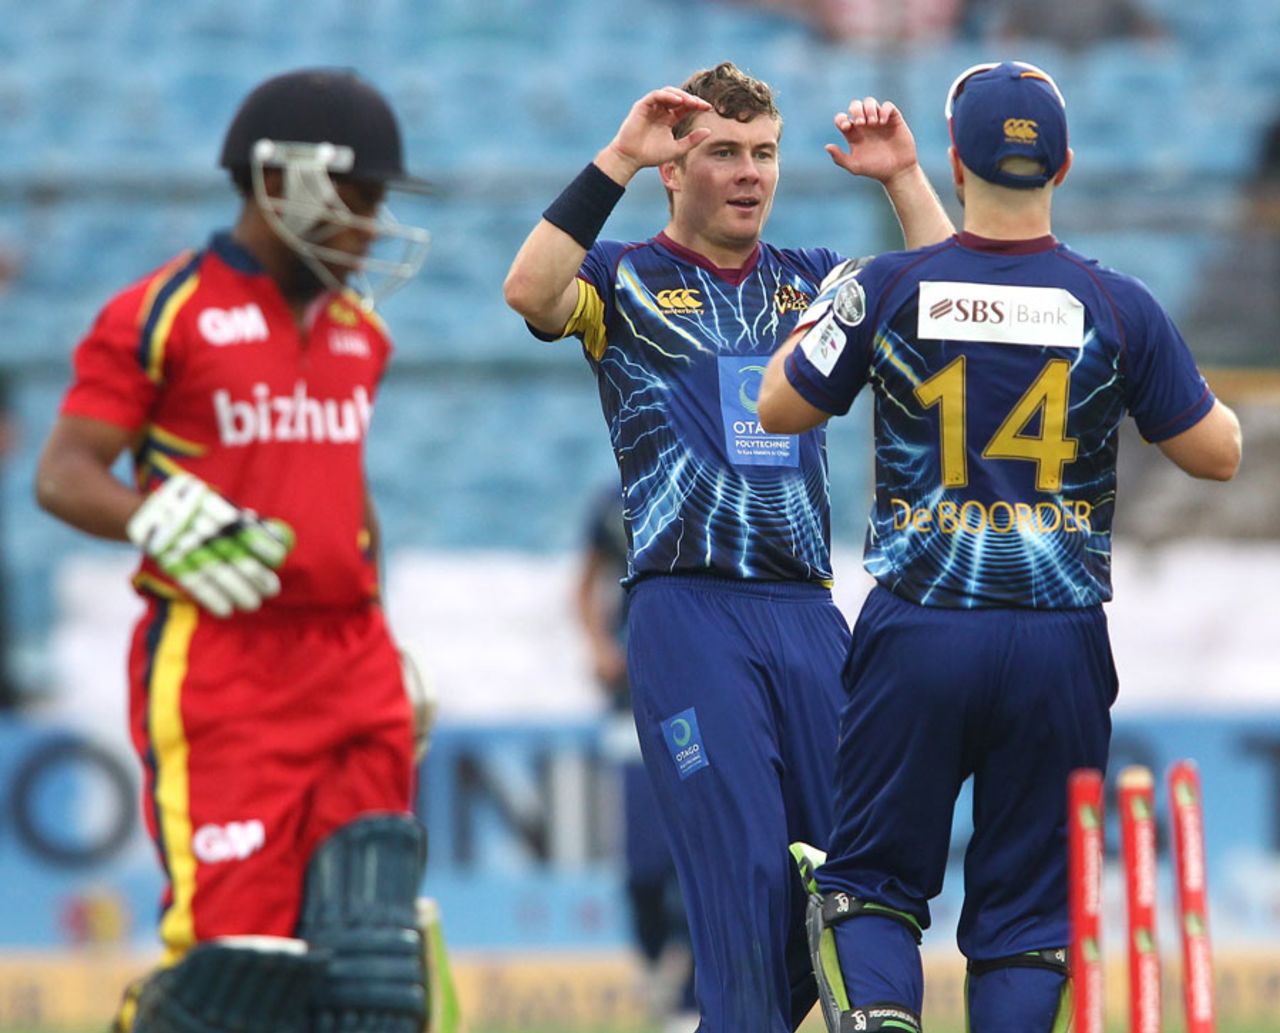 Nick Beard picked up two wickets in two balls, Lions v Otago, Group A, Champions League 2013, Jaipur, September 29, 2013